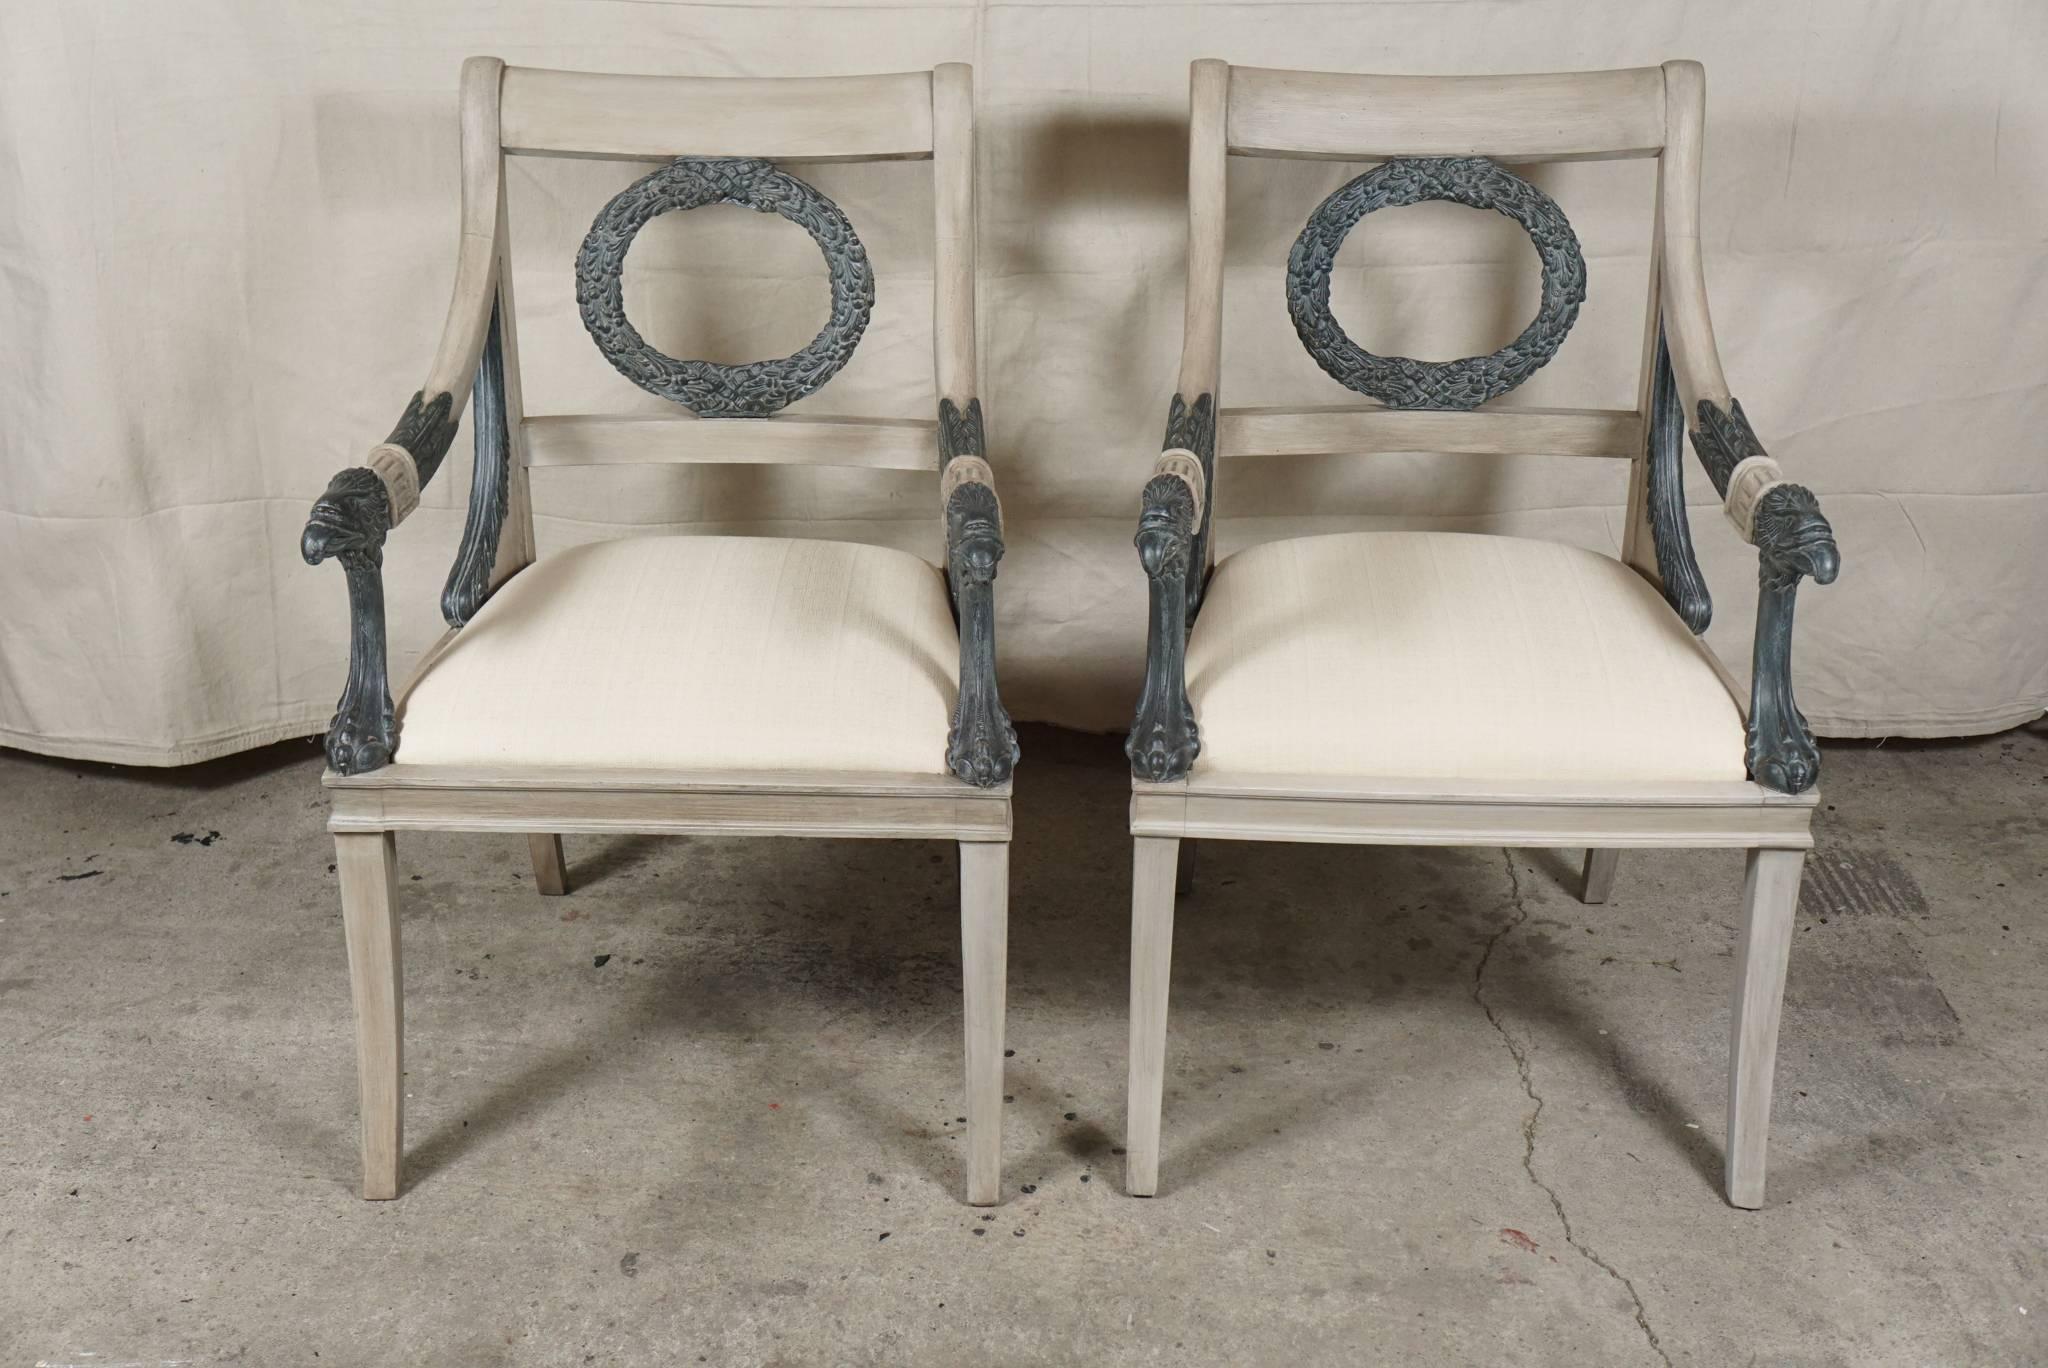 This pair of chairs Swedish or Scandinavian in manufacture were made circa 1880-1900. Of large-scale and finely carved they are in the Empire or Regency taste. Decorative elements include the saber legs, eagle head arms and claw foot upright